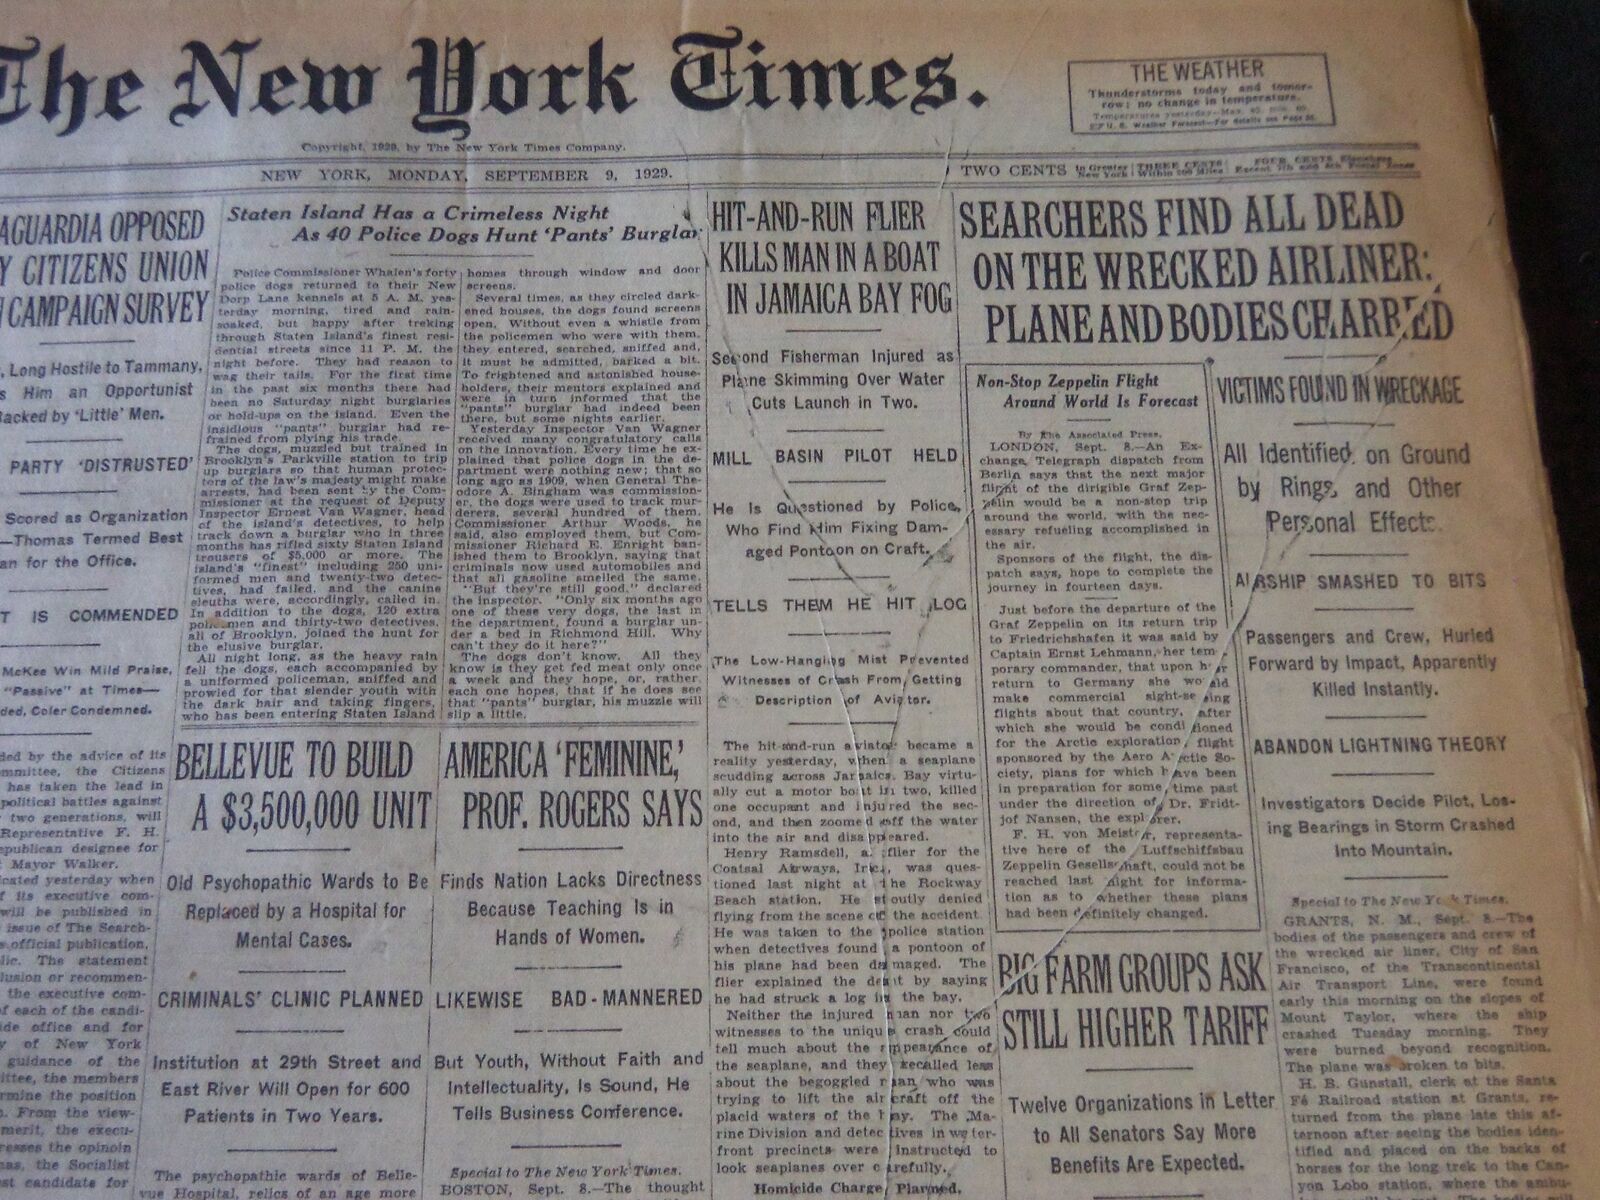 1929 SEPT 9 NEW YORK TIMES - SEARCHERS FIND ALL DEAD WRECKED AIRLINER - NT 6567